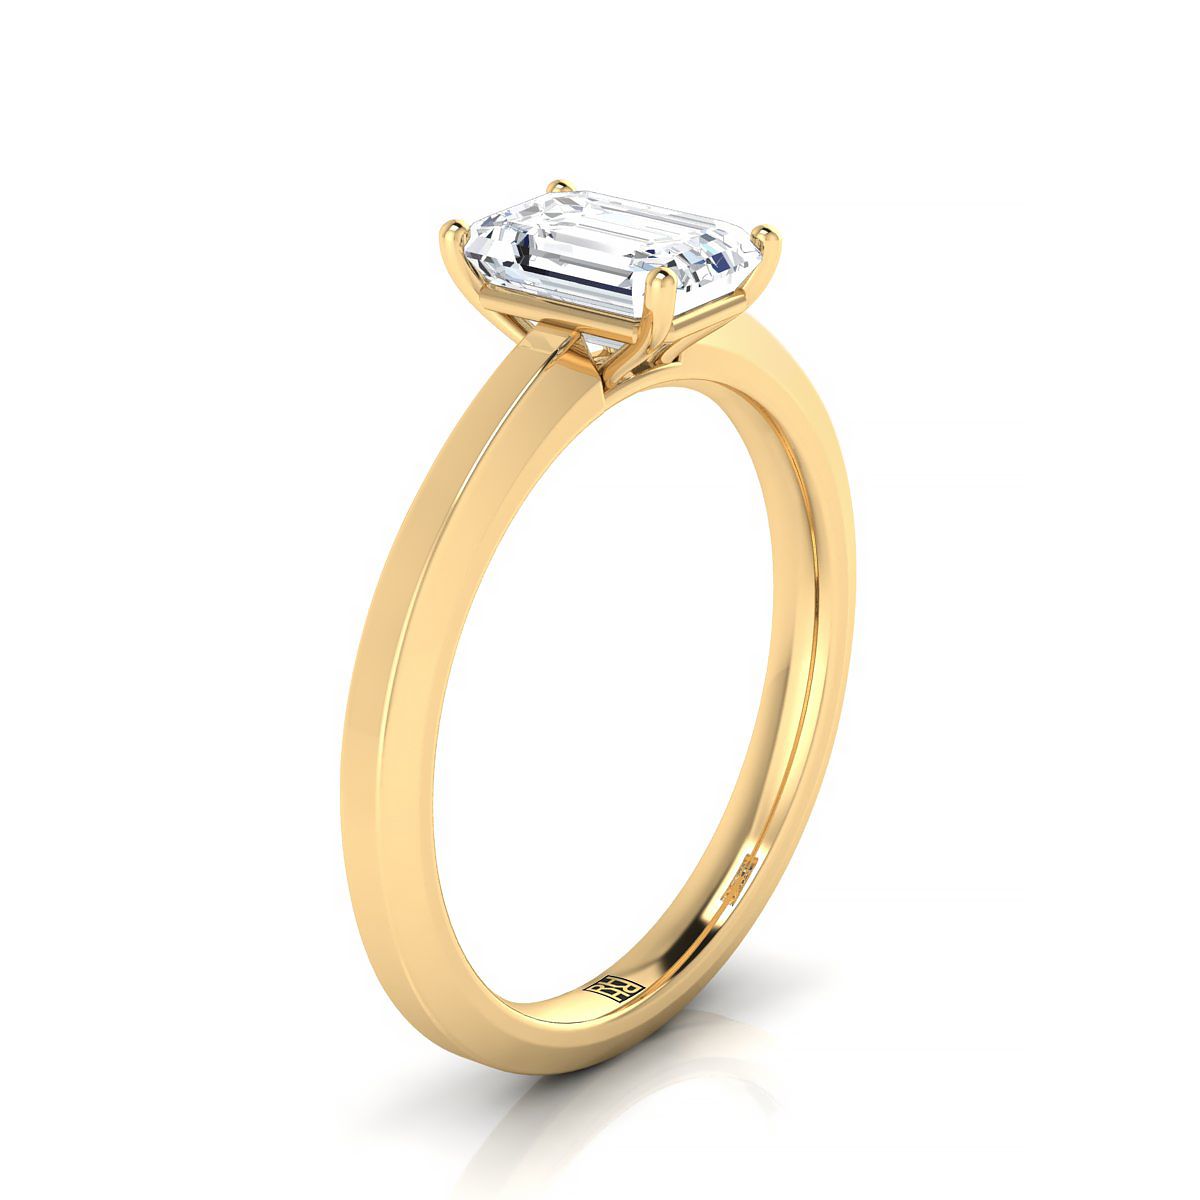 14K Yellow Gold Emerald Cut  Beveled Edge Comfort Style Bright Finish Solitaire Engagement Ring